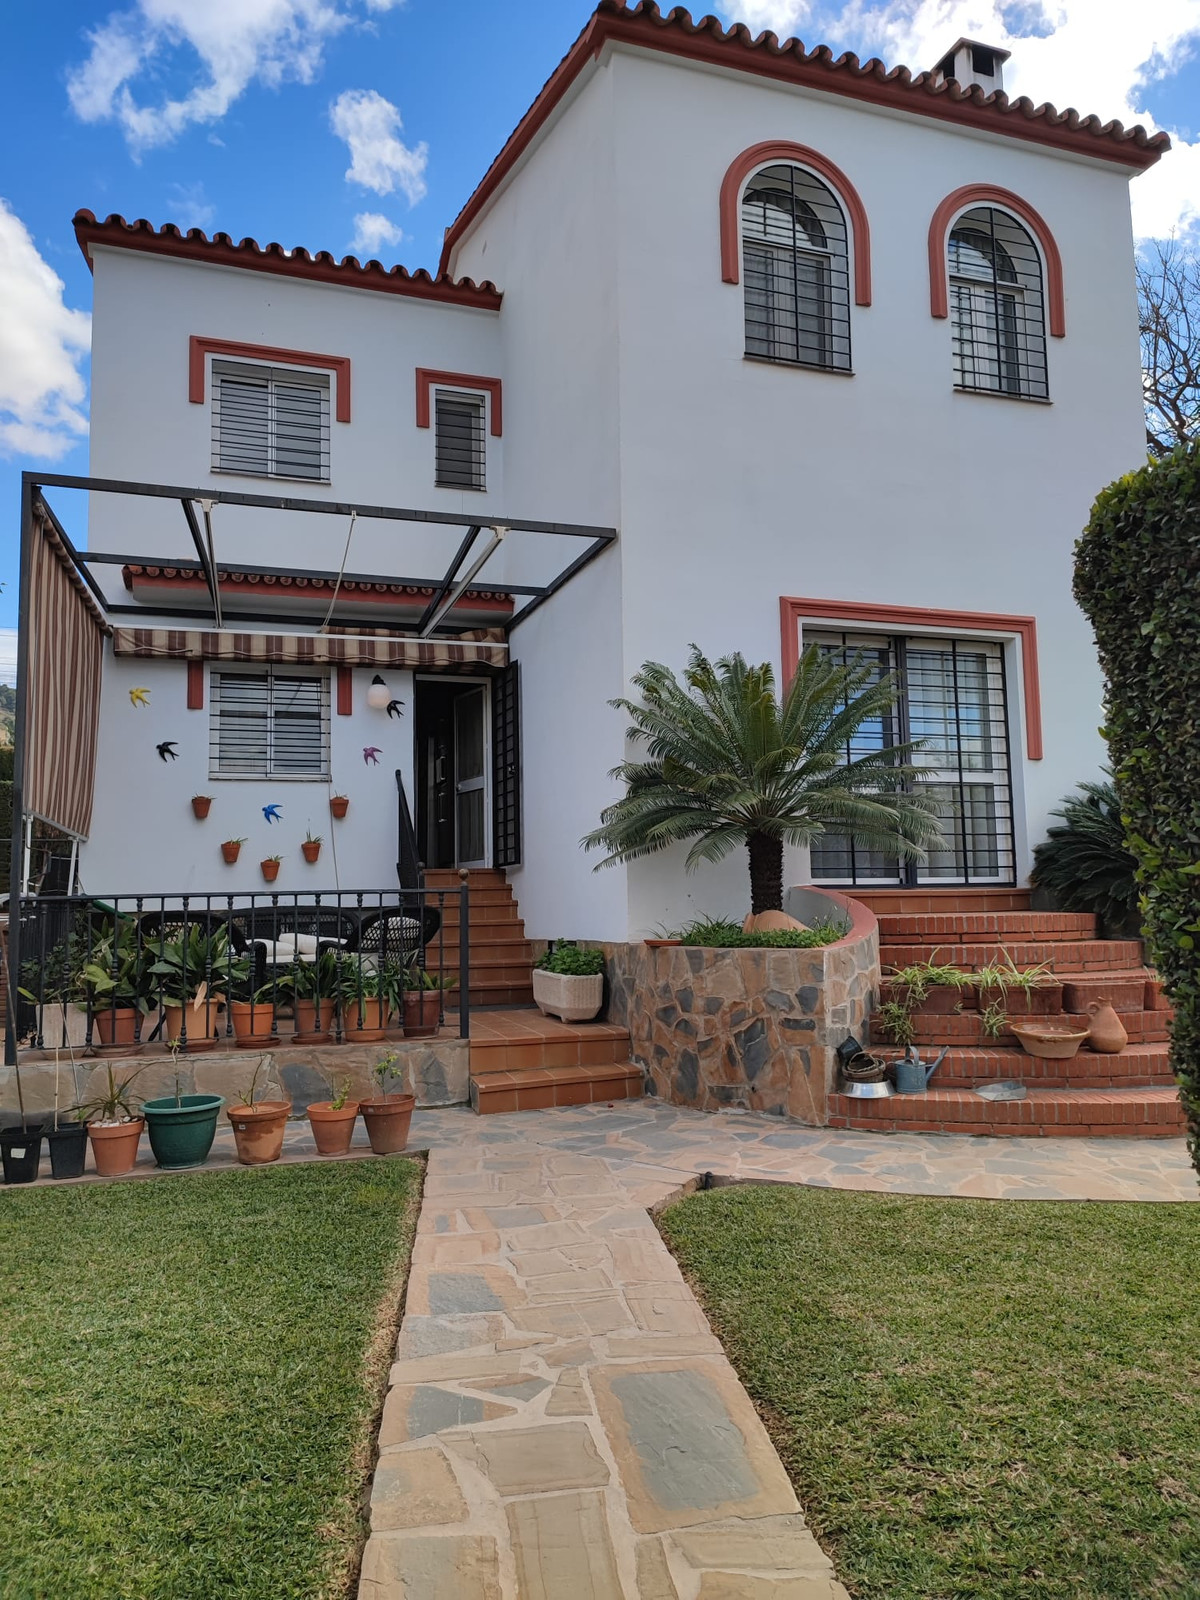 Luxurious villa located in one of the best urbanizations in Alhaurín de la Torre, on one of its main avenues and close to all kinds of services and...